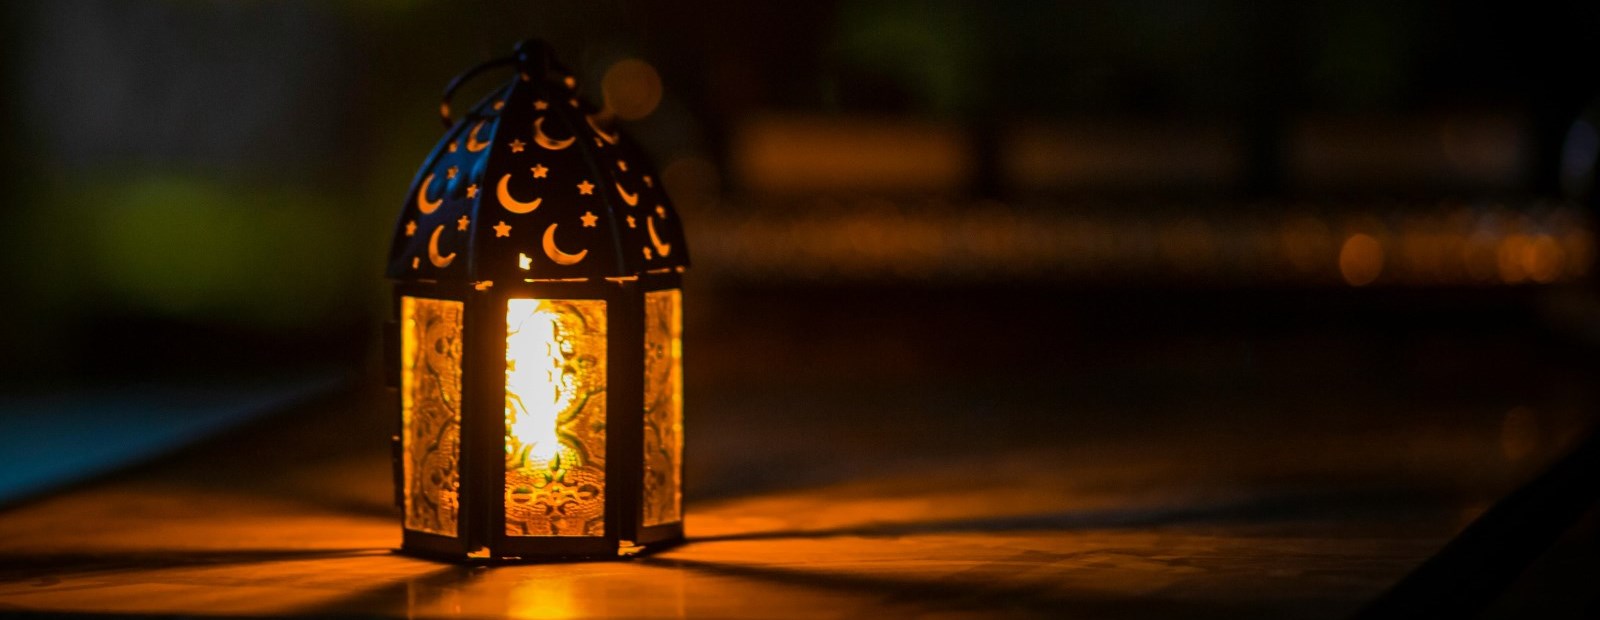 Small lantern with crescent moons shining bright yellow in a dark room.